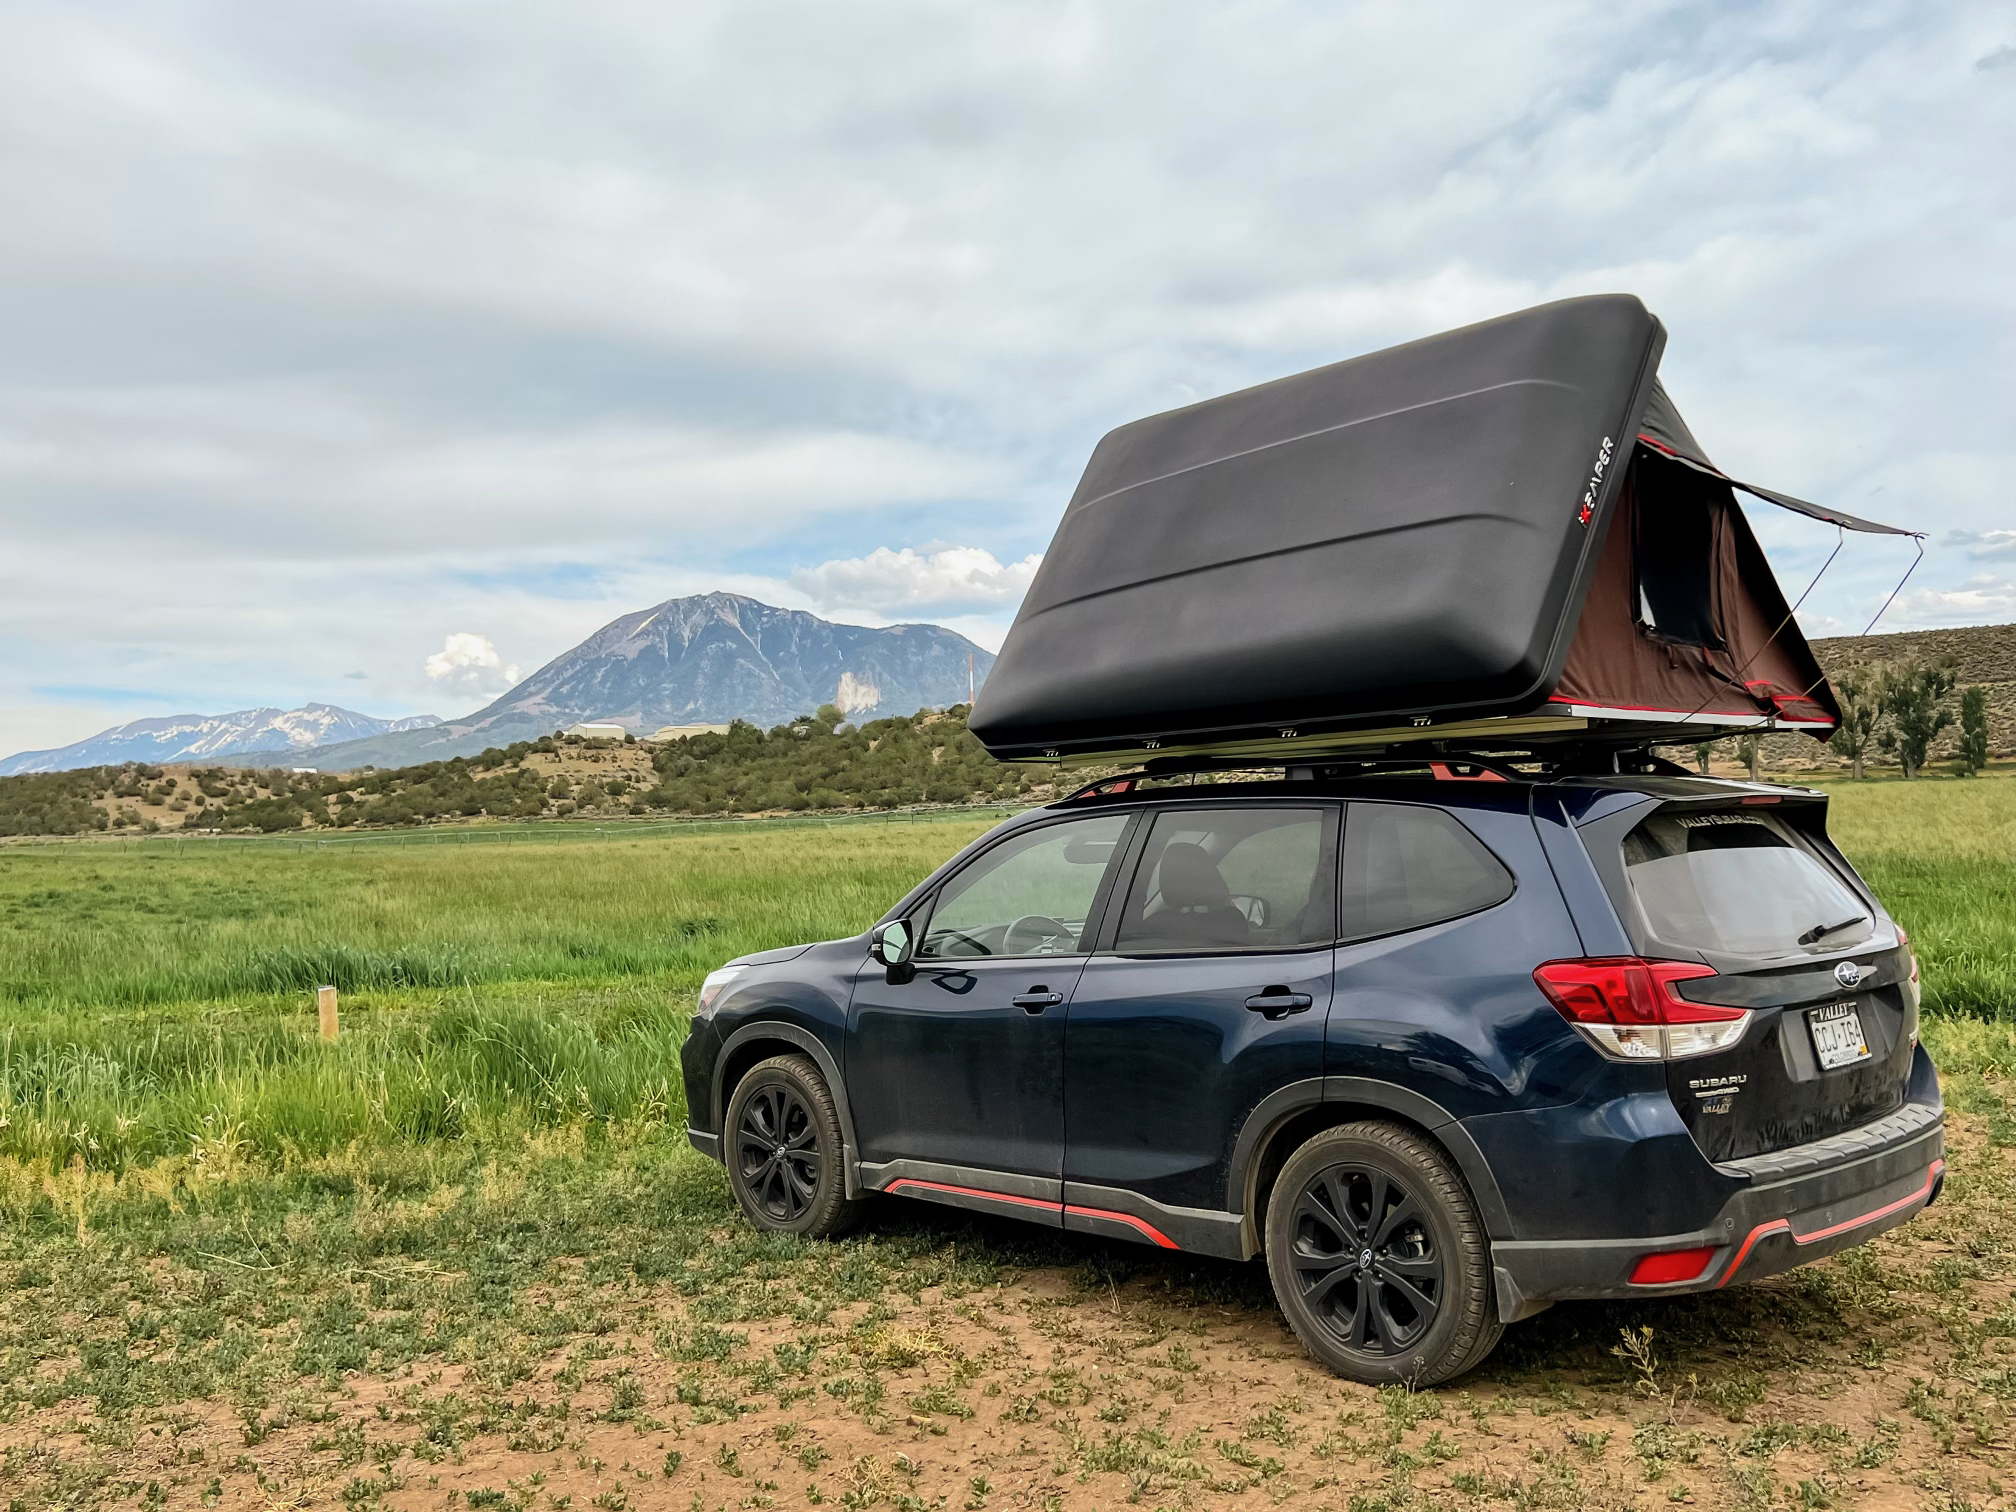 Adventure on the go with a roof top tent.